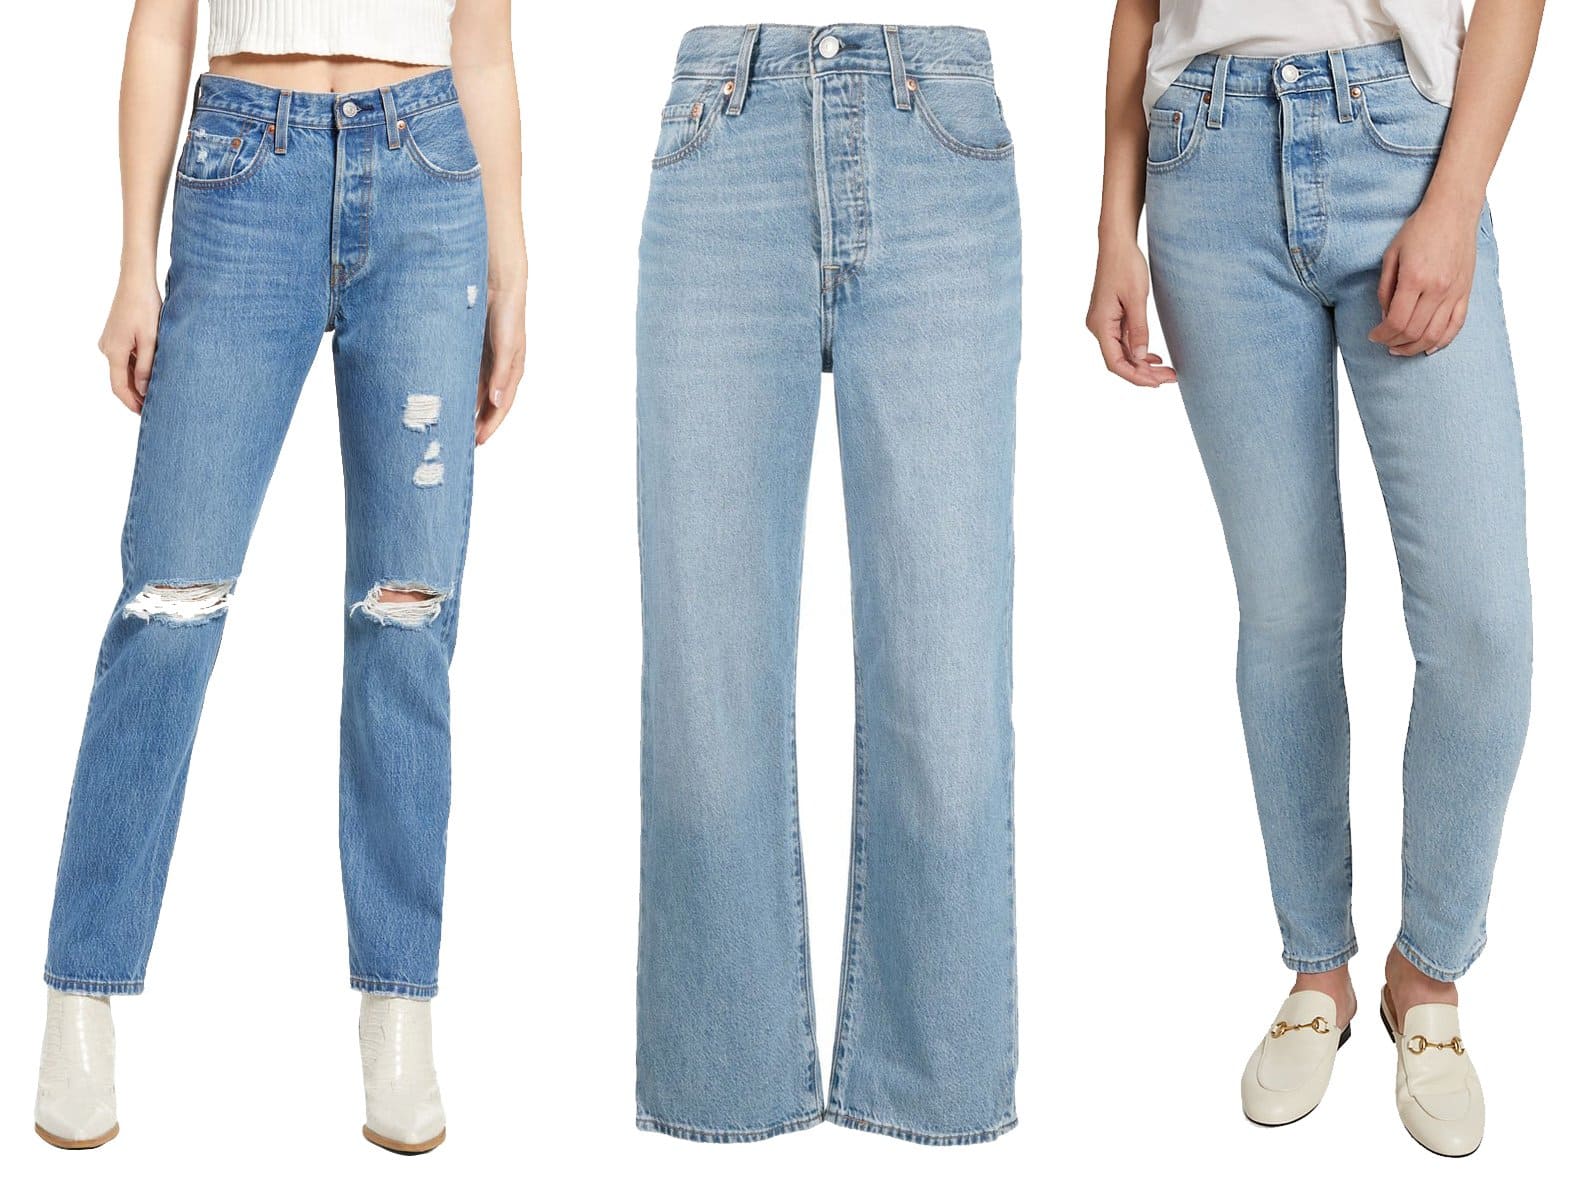 Levi's 501 Ripped Straight-Leg Jeans; Levi's Ribcage Straight-Leg Cropped Jeans; Levi's 501 High-Rise Skinny-Fit Jeans